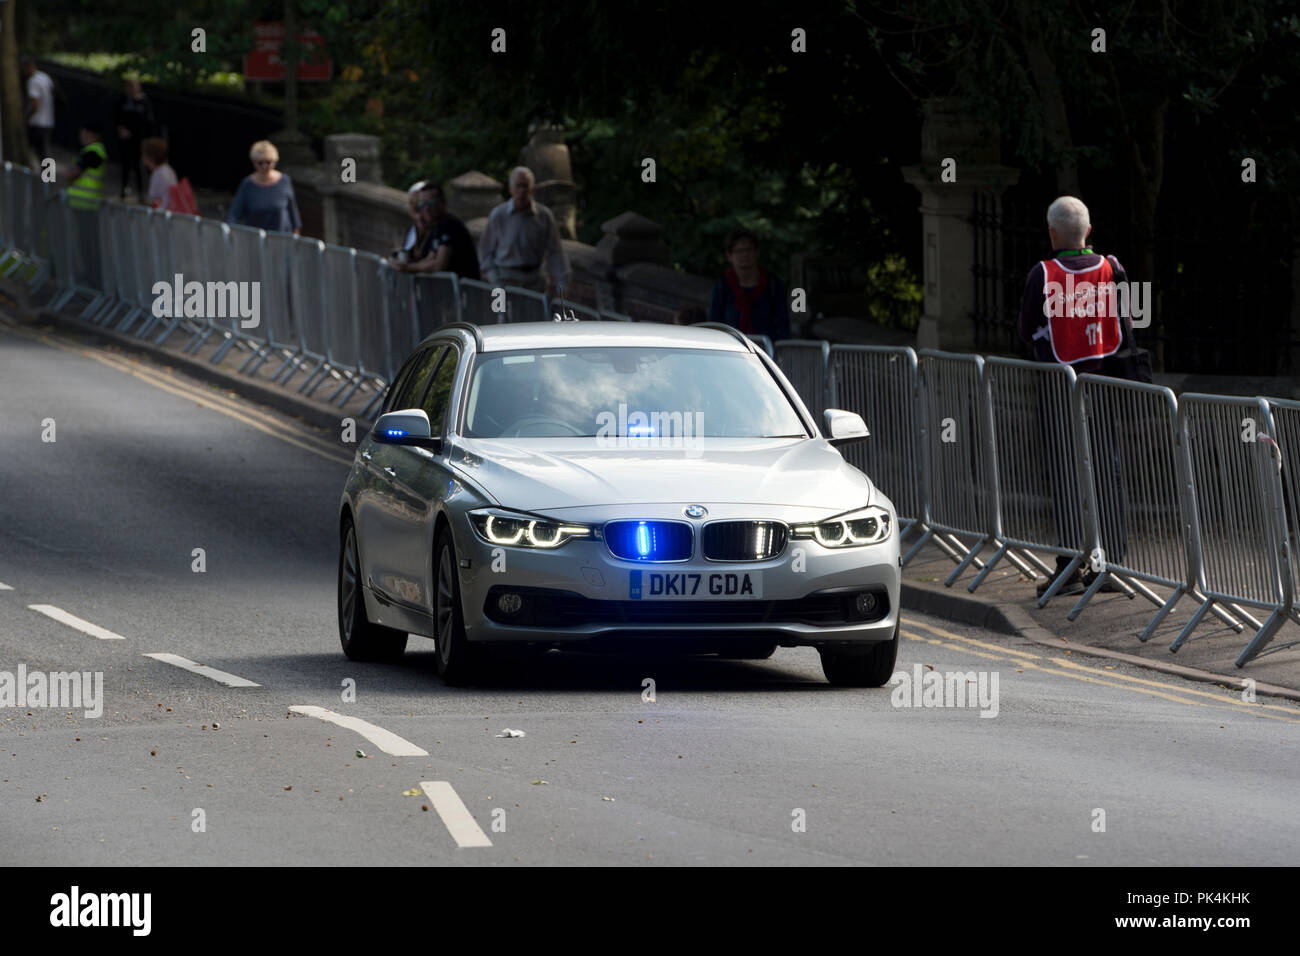 Official car with blue flashing lights at the Tour of Britain cycle race, Leamington Spa, UK Stock Photo